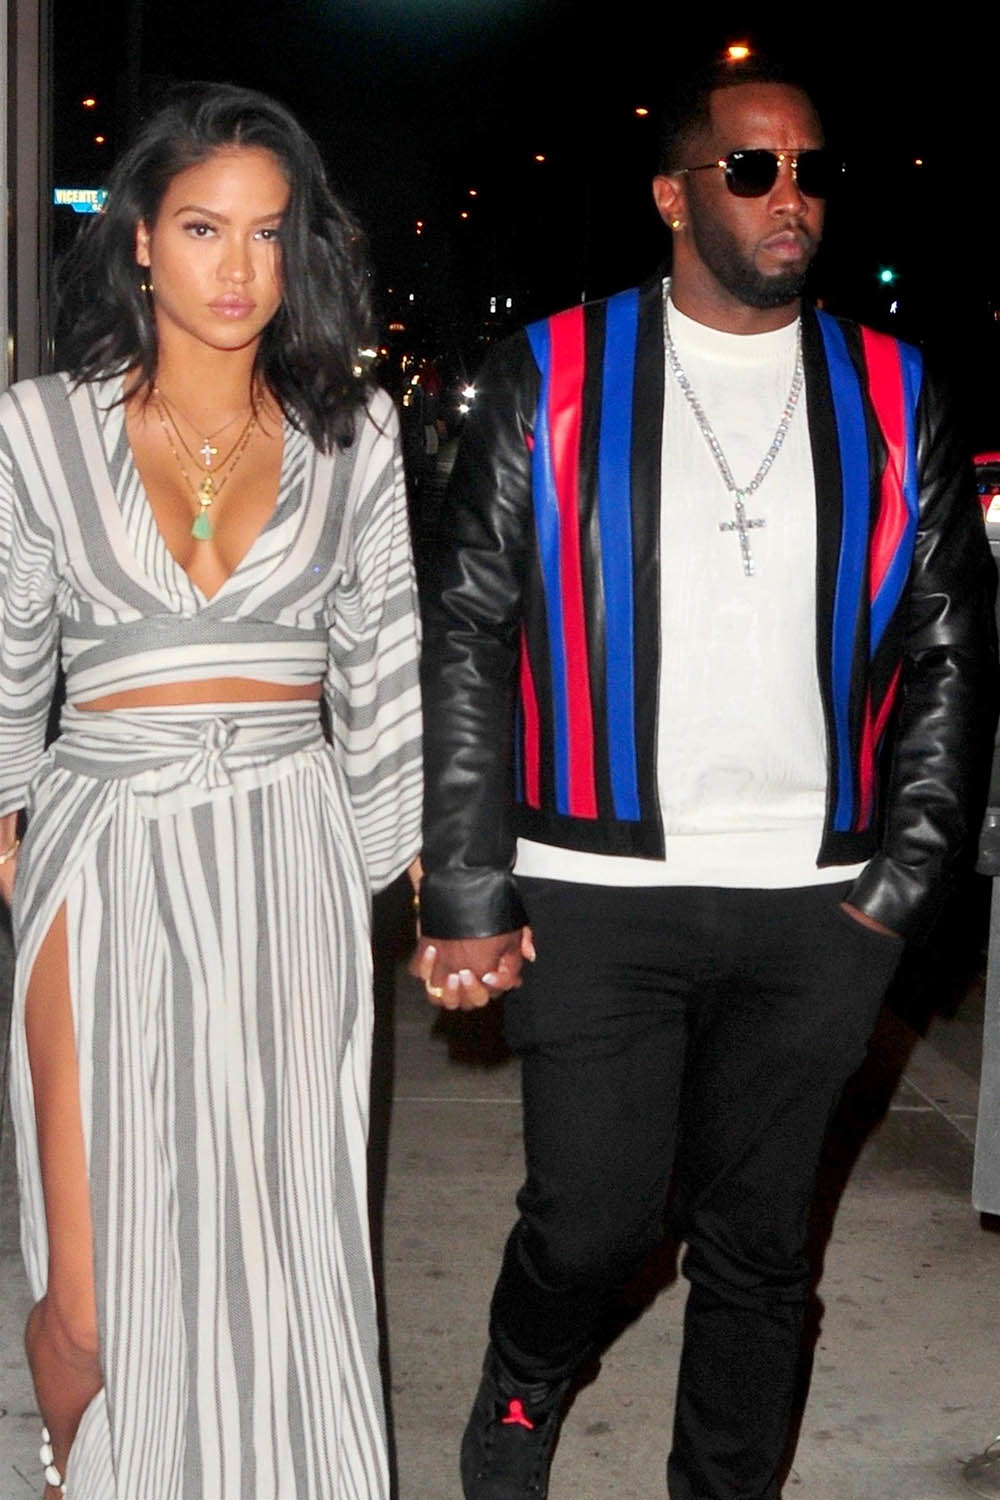 Sean “Puffy” Combs and Cassie Ventura at Catch LA for Dinner | Sandra Rose